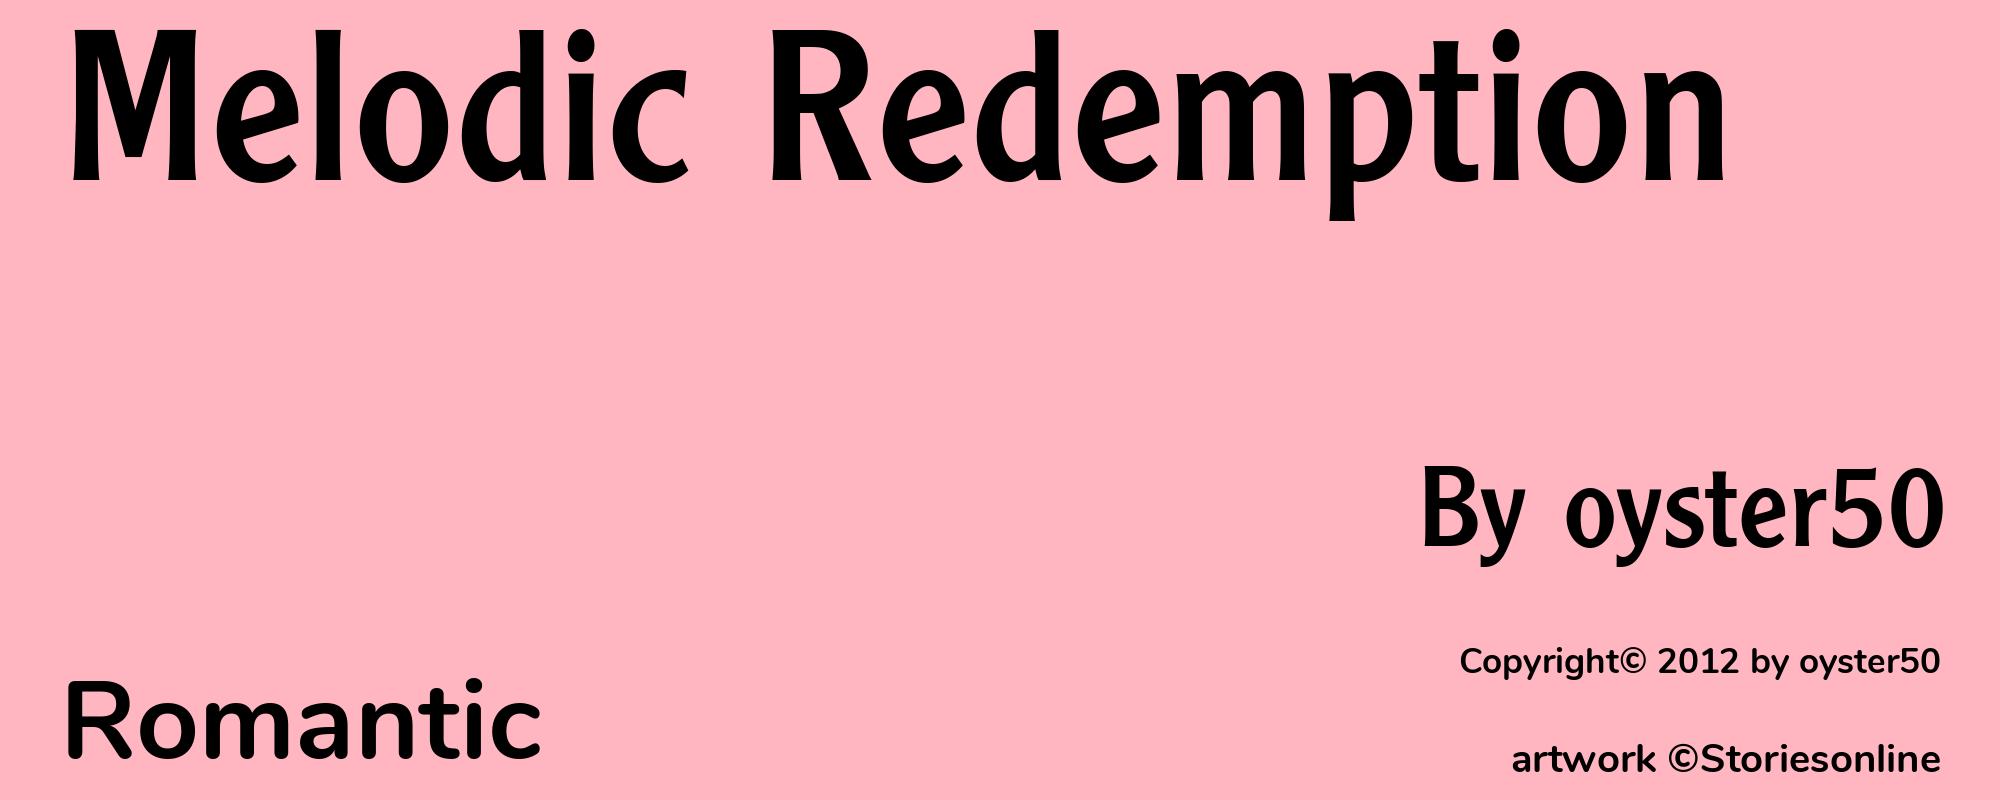 Melodic Redemption - Cover